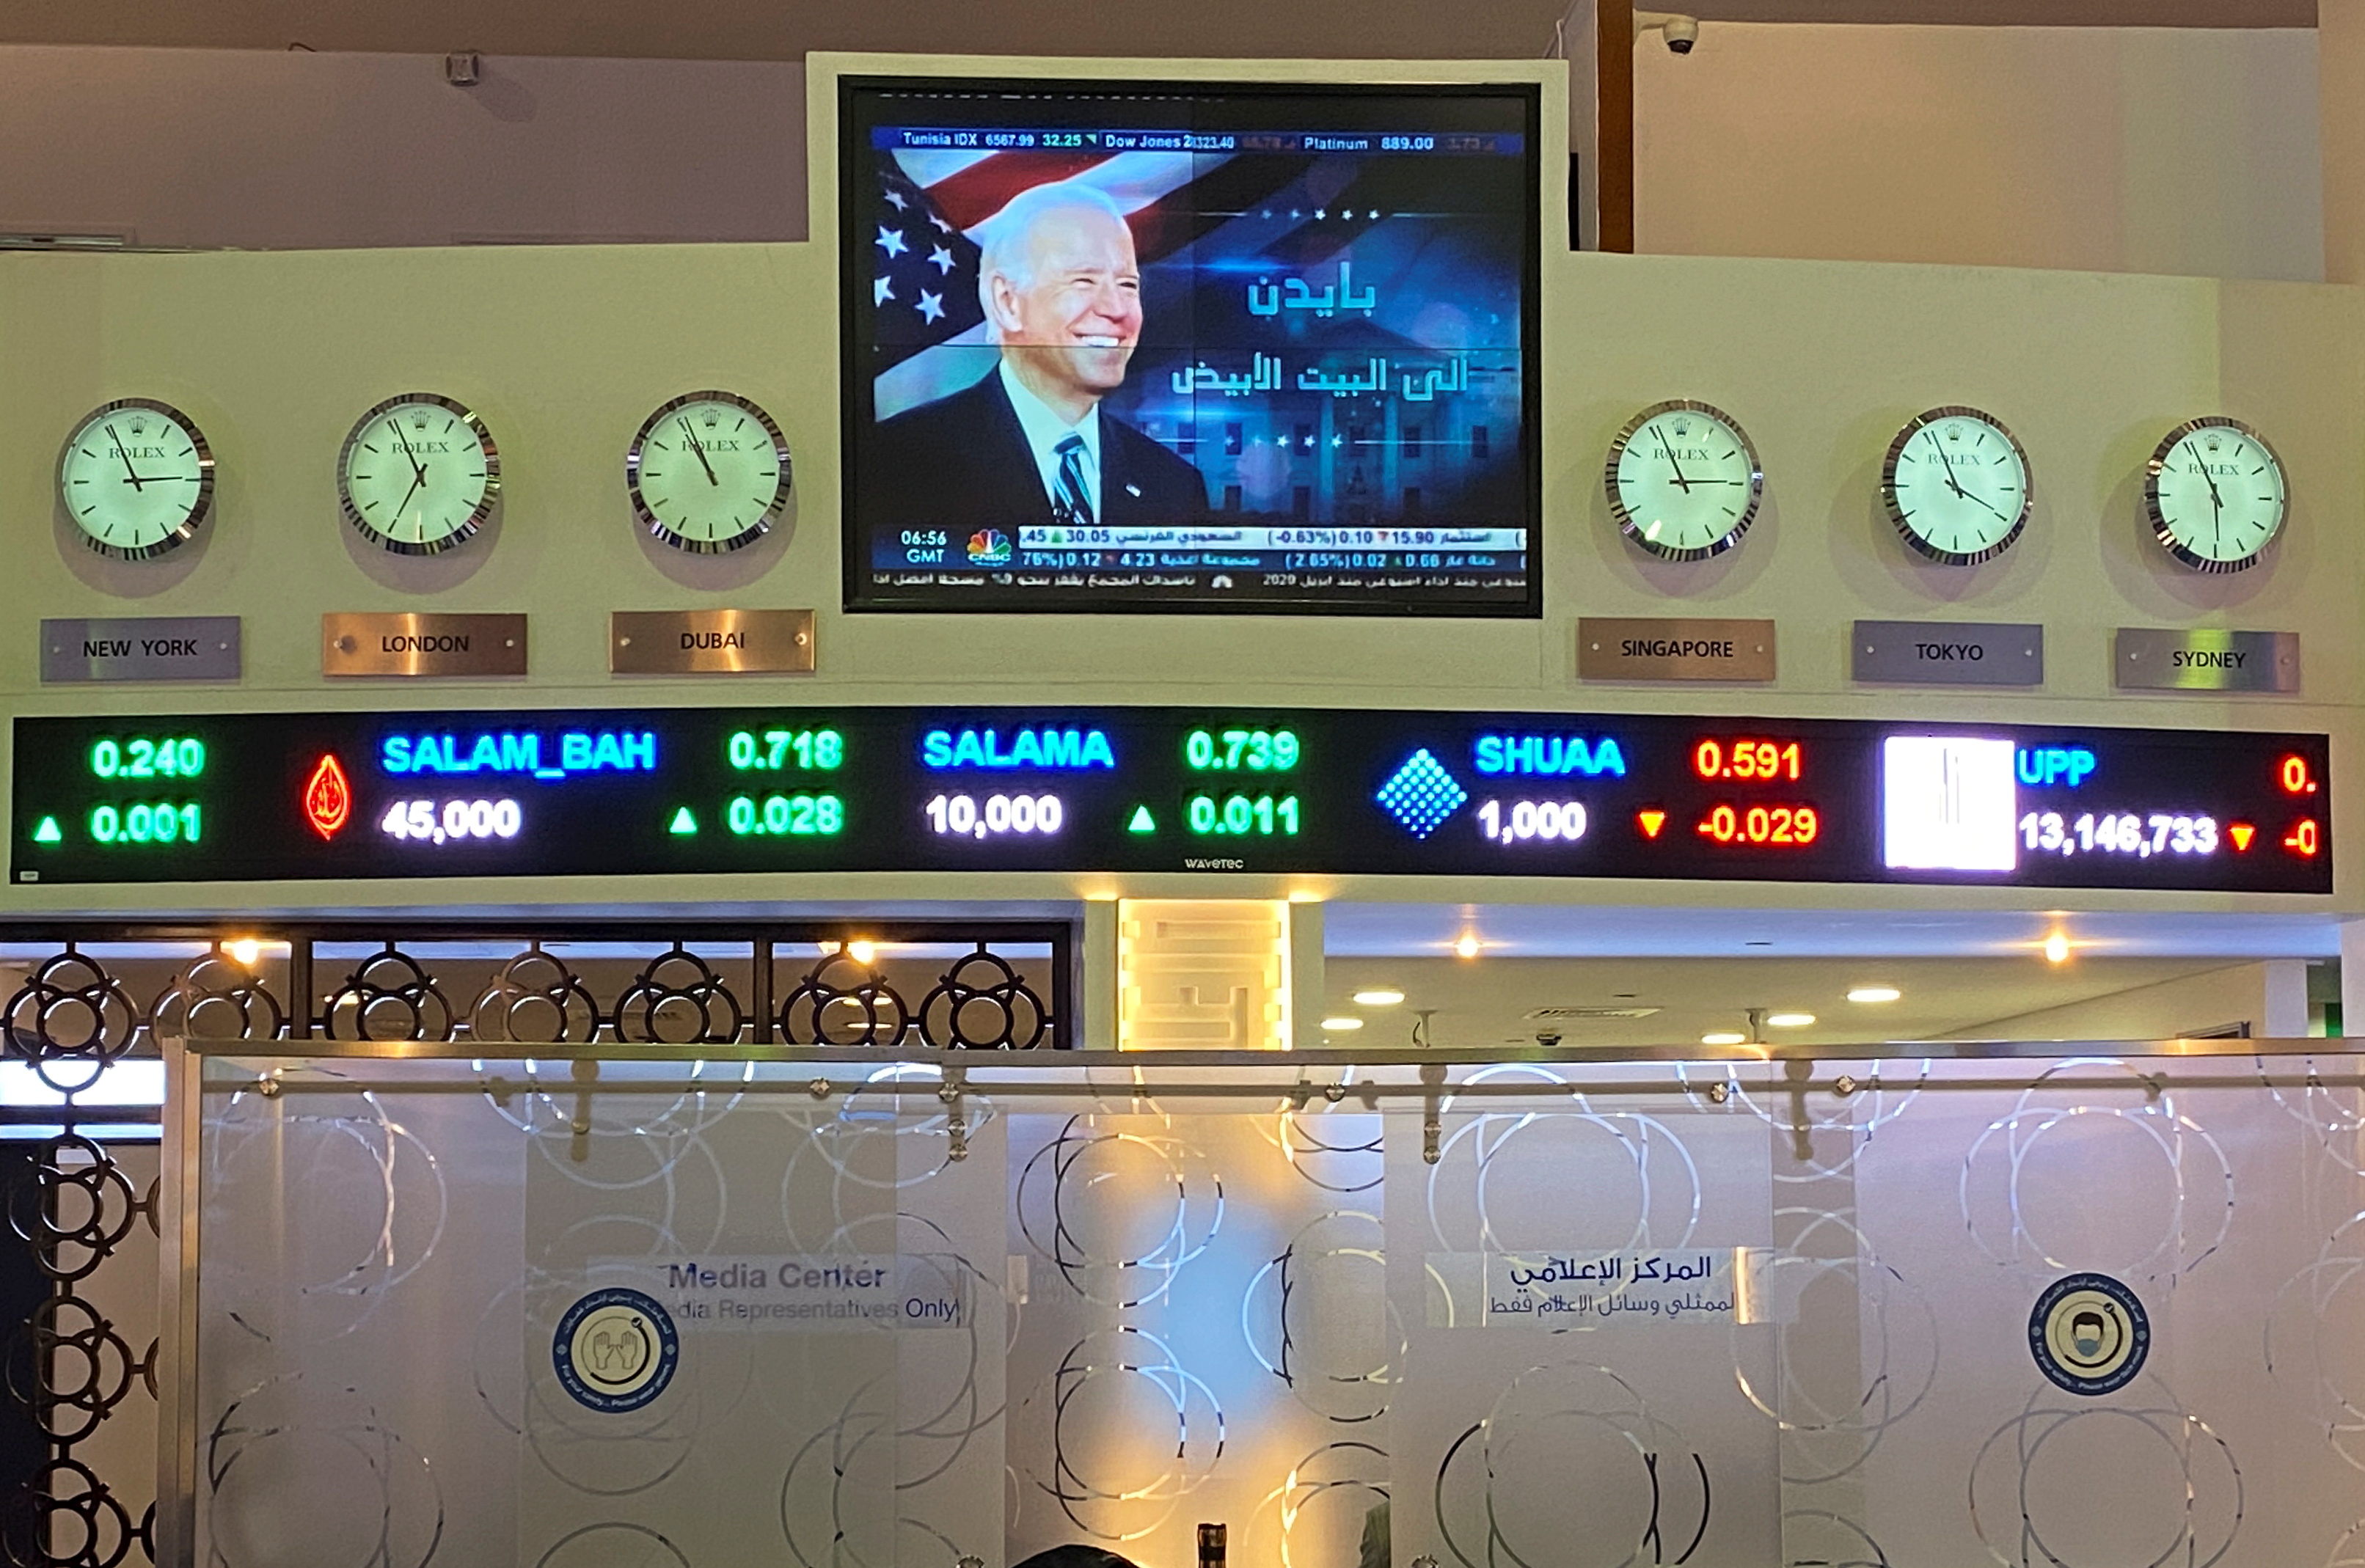 News of Joe Biden's victory in U.S. elections is aired on a digital screen in Dubai Stock Exchange in Dubai